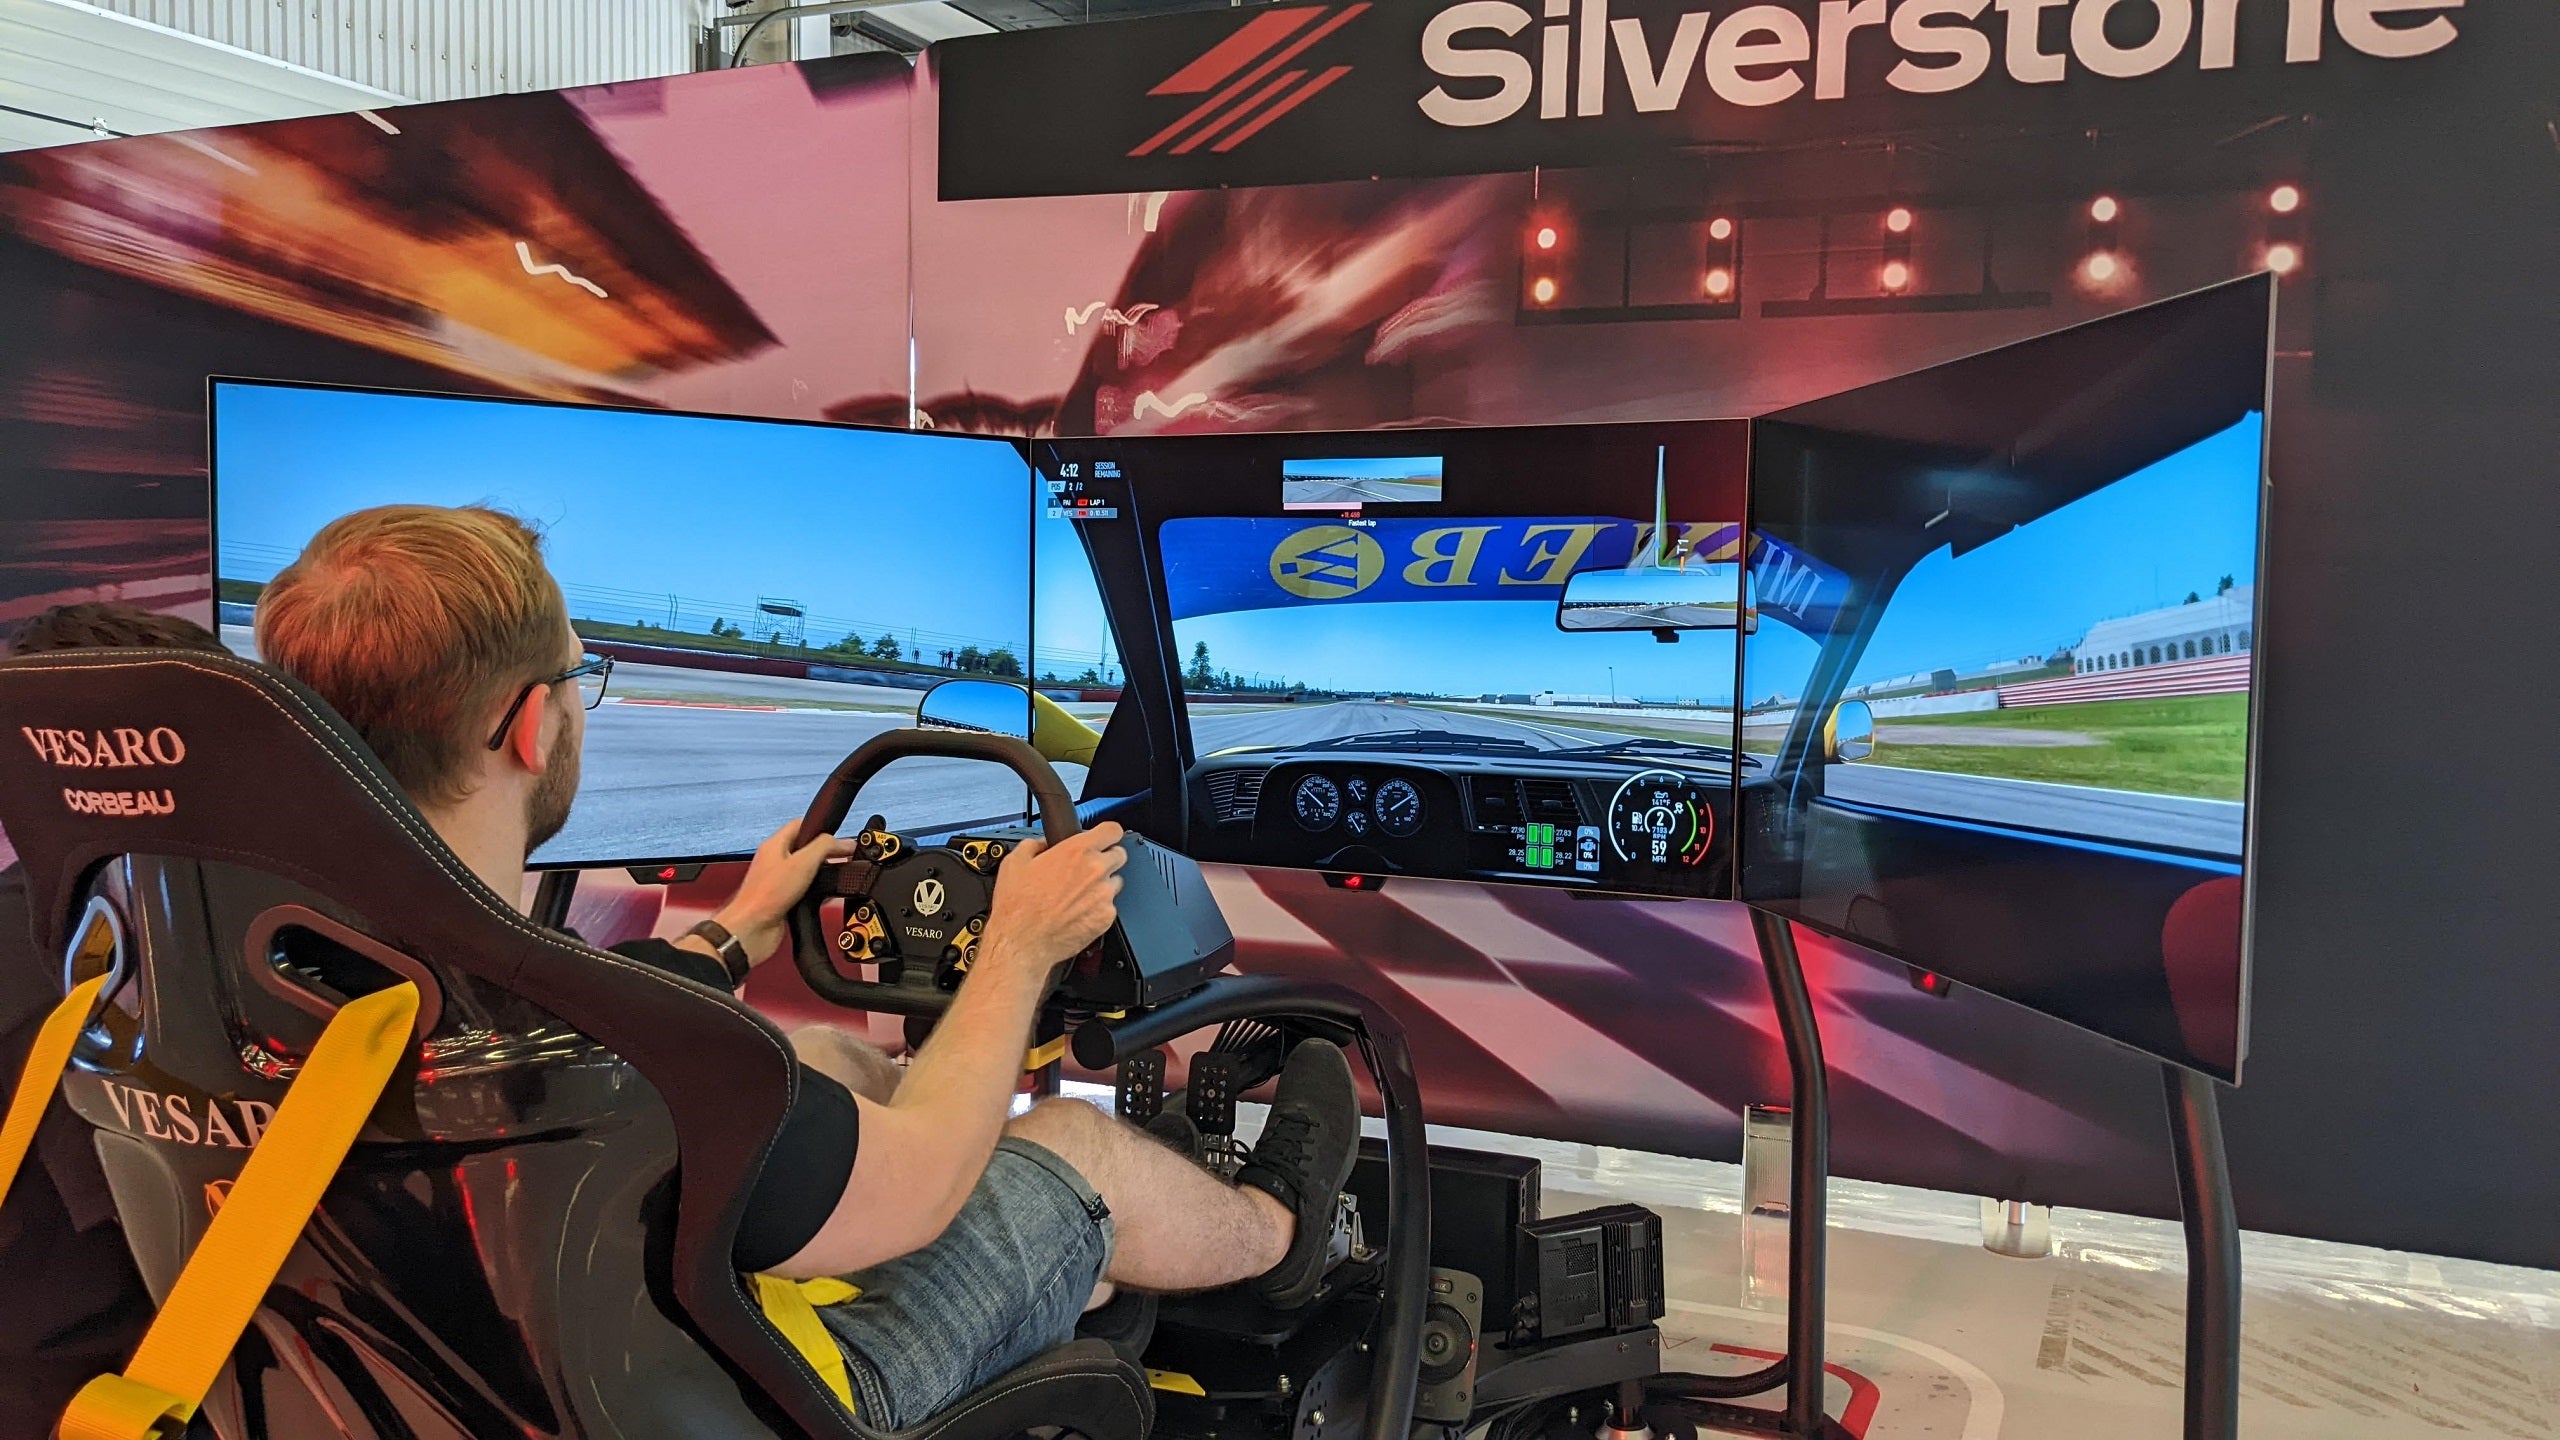 Three Asus ROG Swift PG48UQ gaming monitors arranged in front of a racing sim rig.